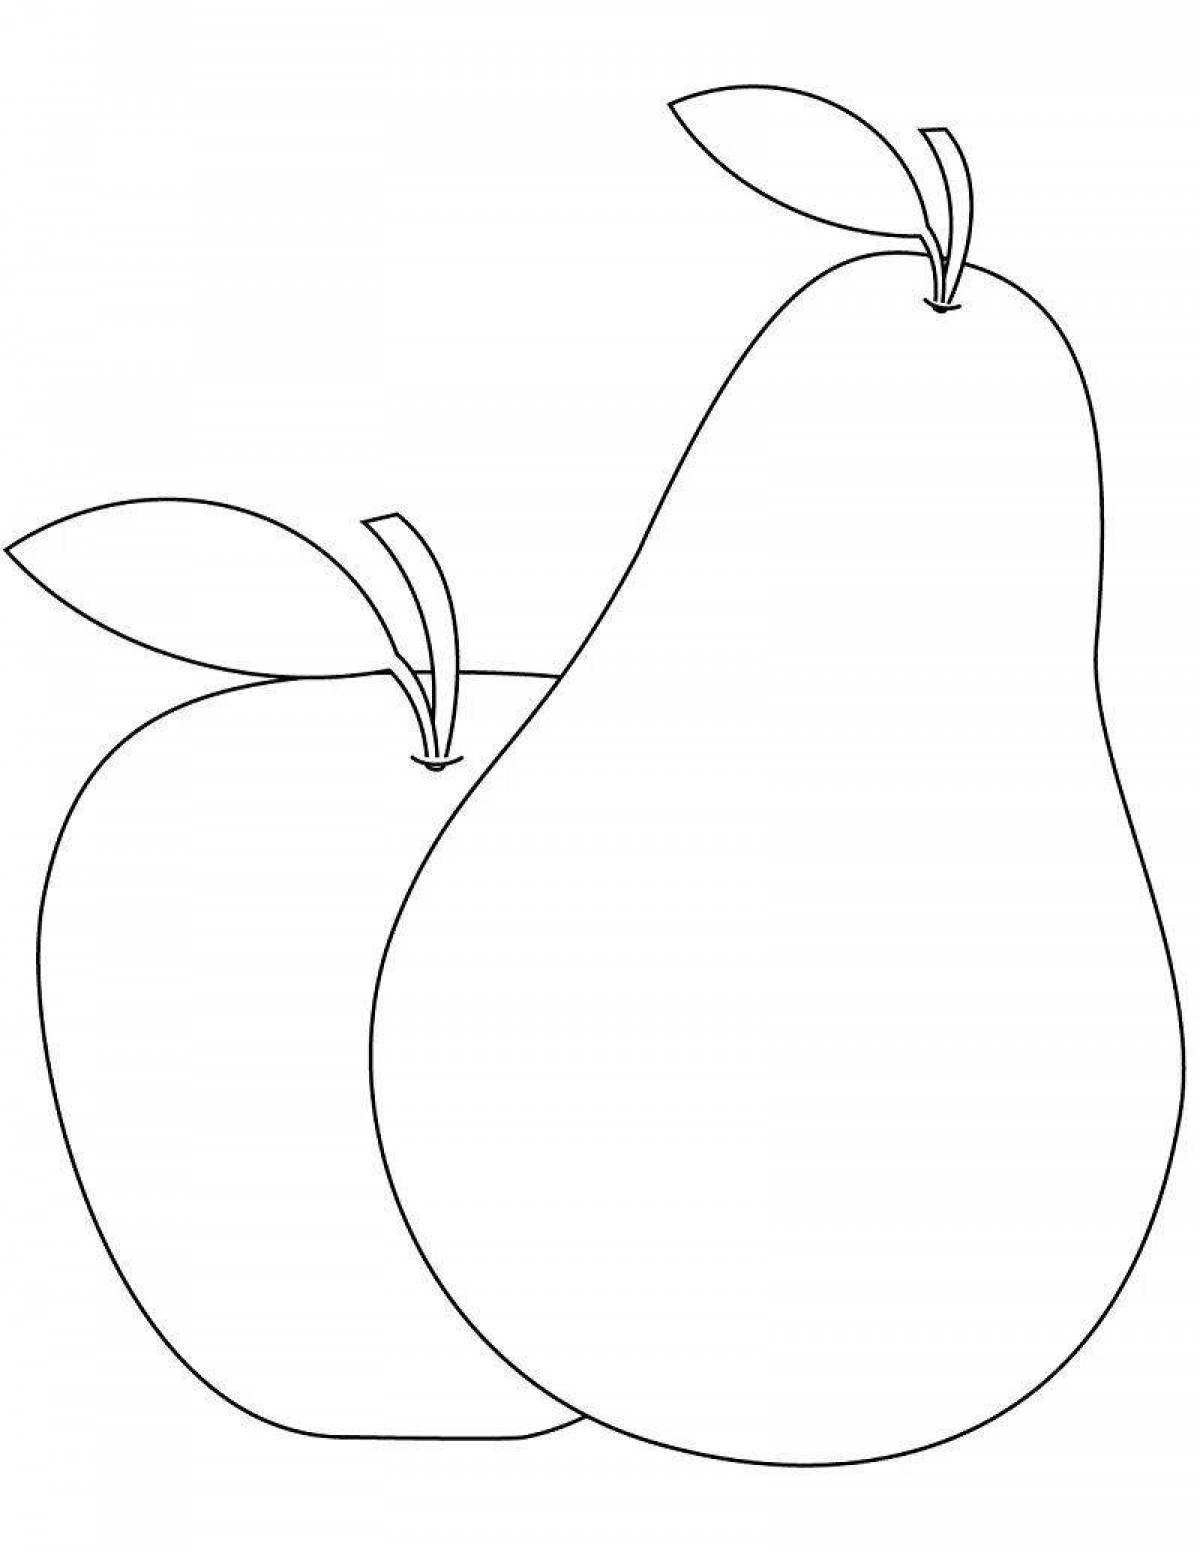 Glittering apple pearl coloring page